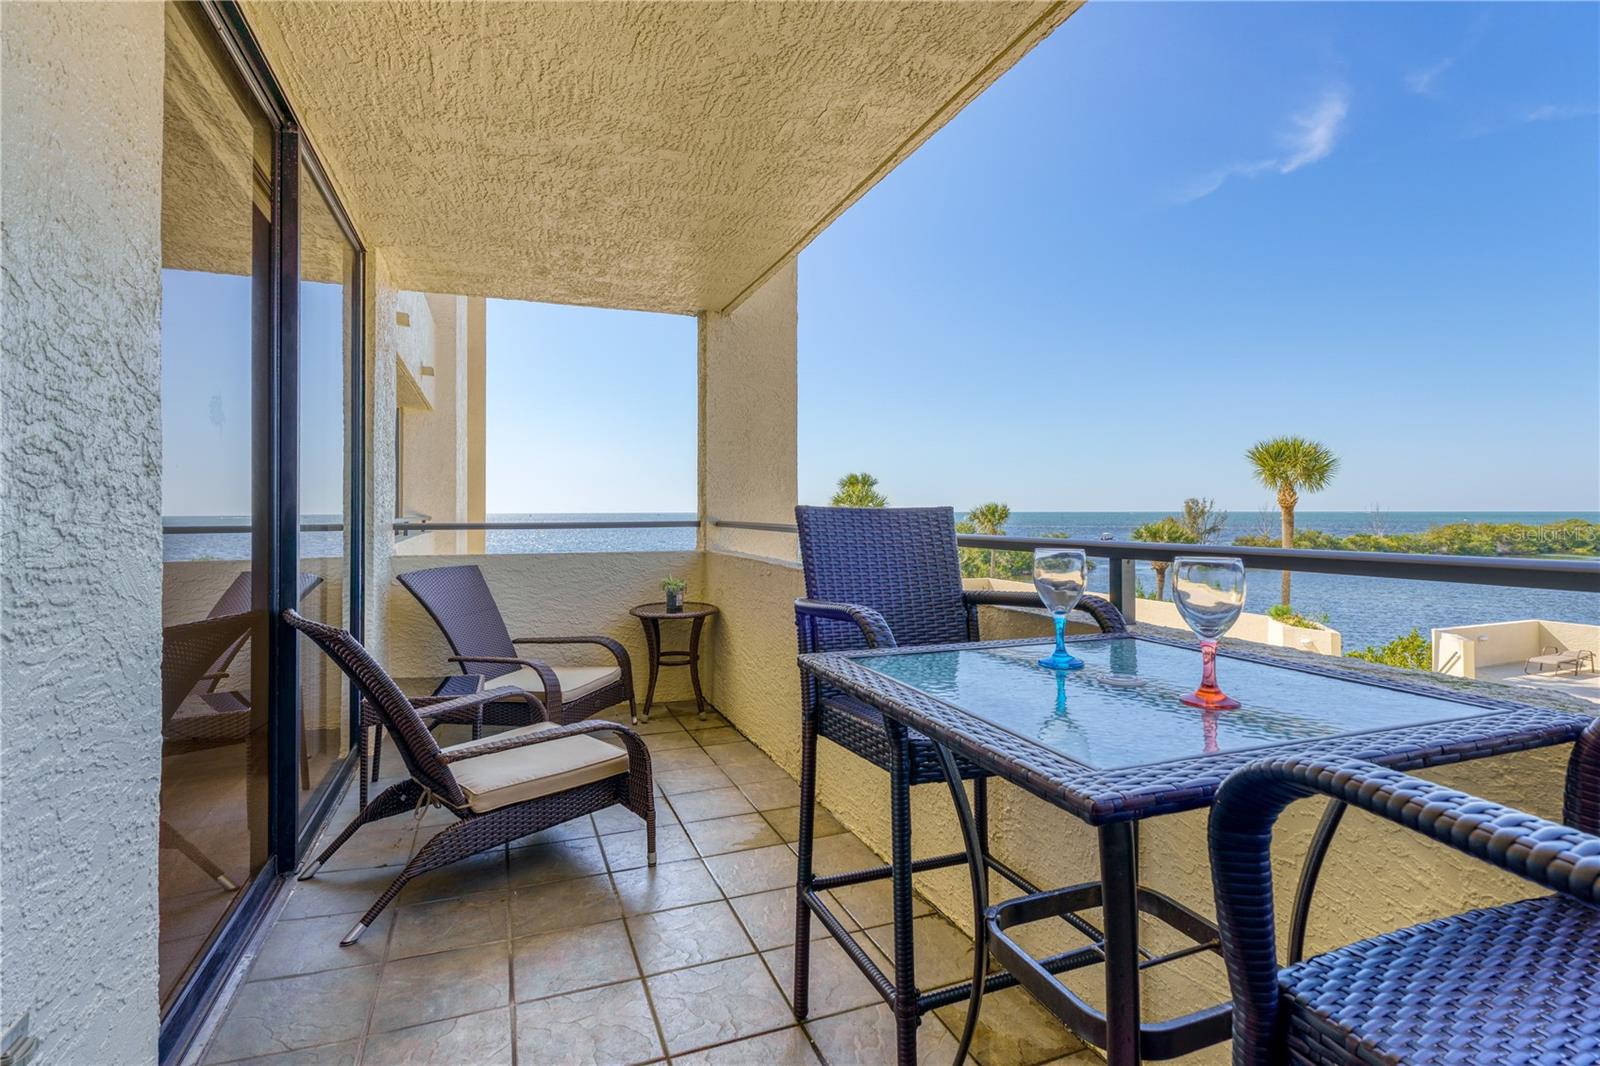 BEAUTIFUL Views of the Gulf of Mexico from your private Balcony!